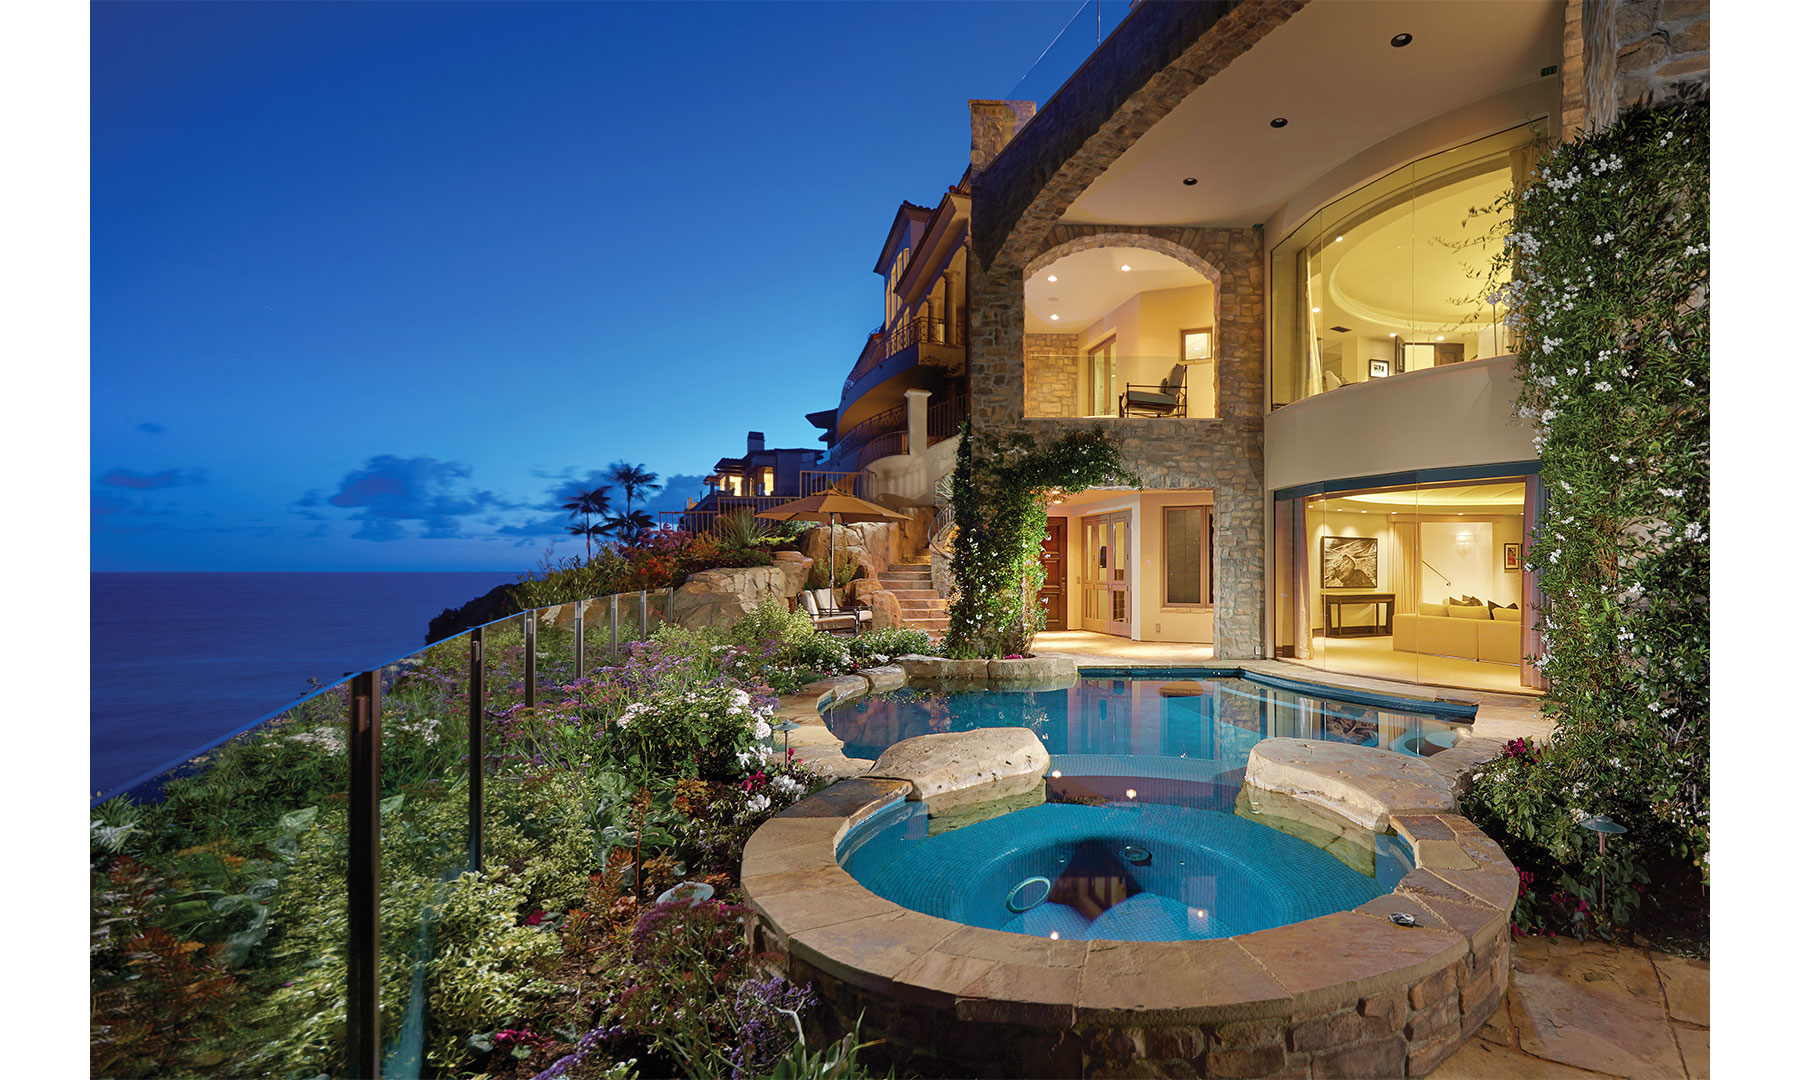 Pictures: A Luxury Oceanfront Home in Laguna Beach - DuJour